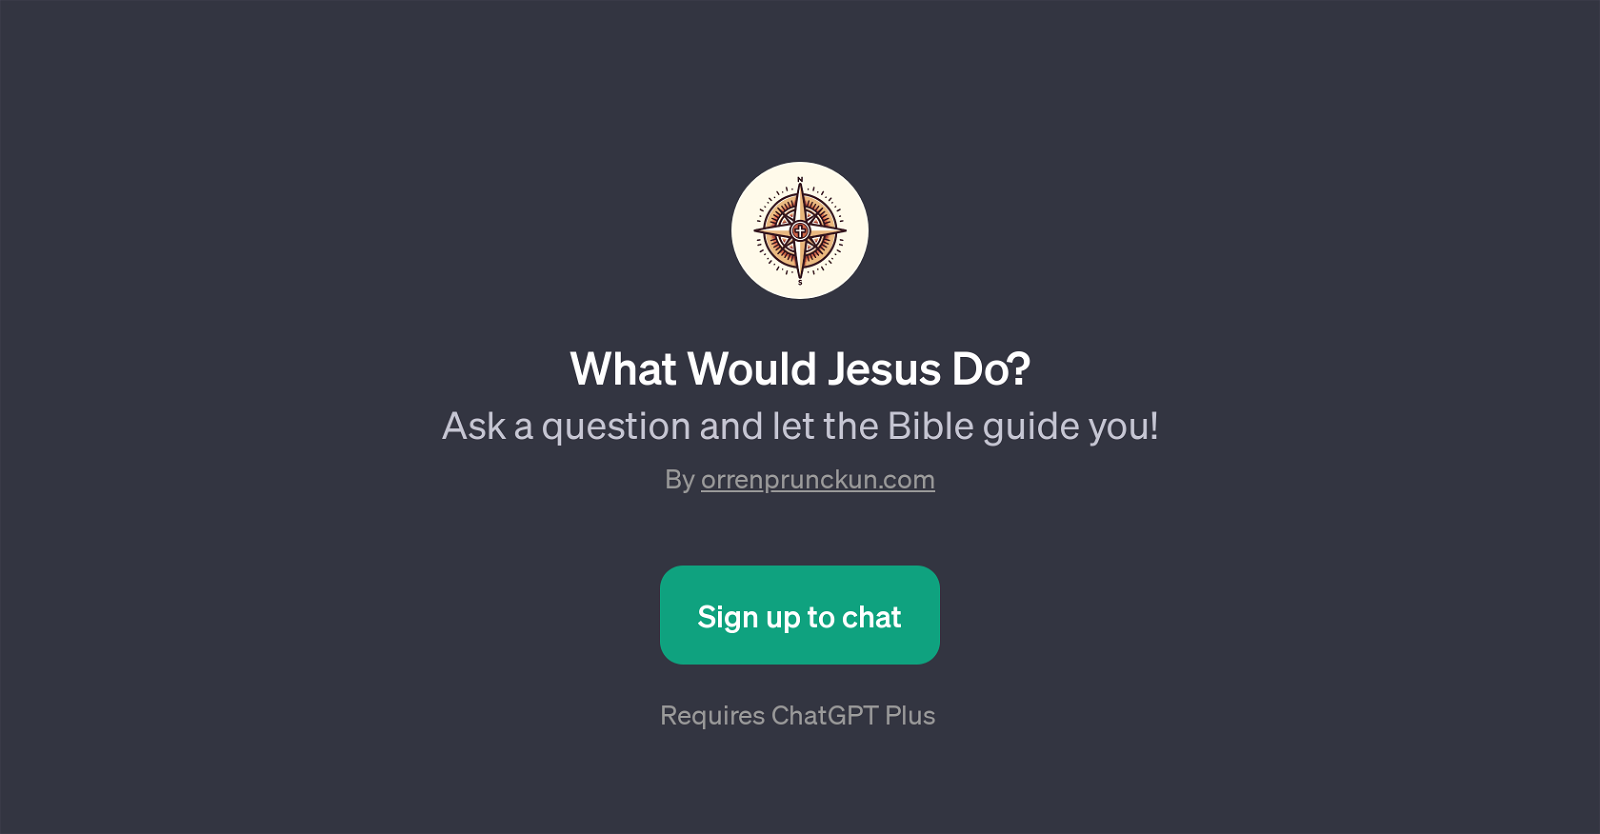 What Would Jesus Do website